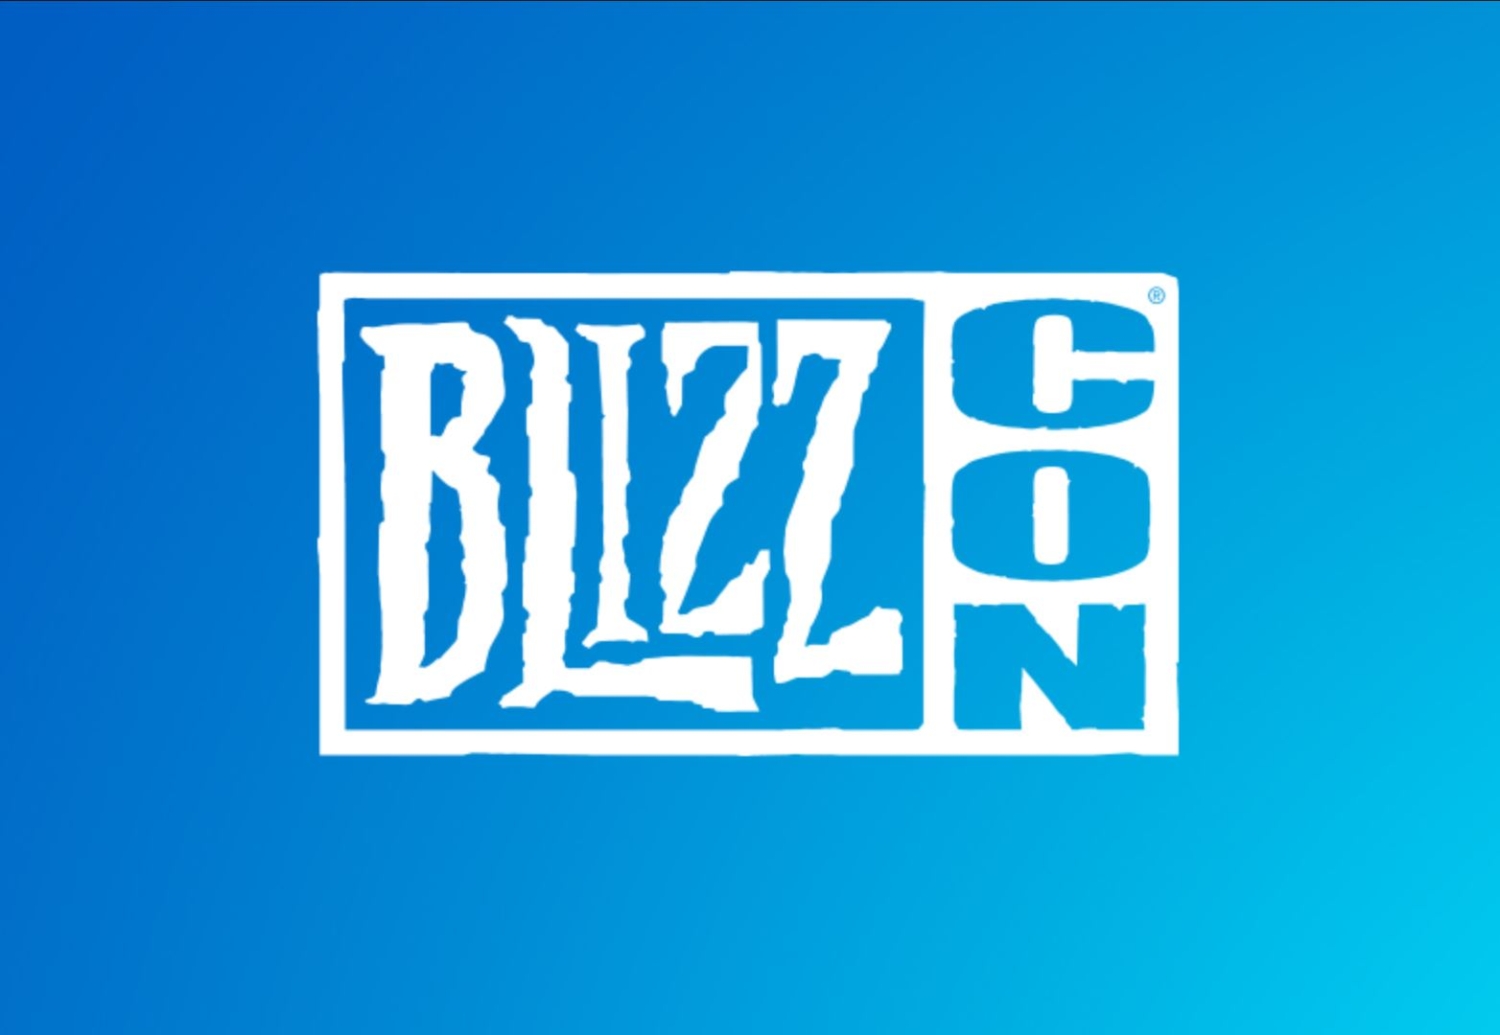 https://static.tweaktown.com/news/8/2/82401_665_blizzcon-february-2021-event-cancelled-but-news-is-still-coming_full.jpg